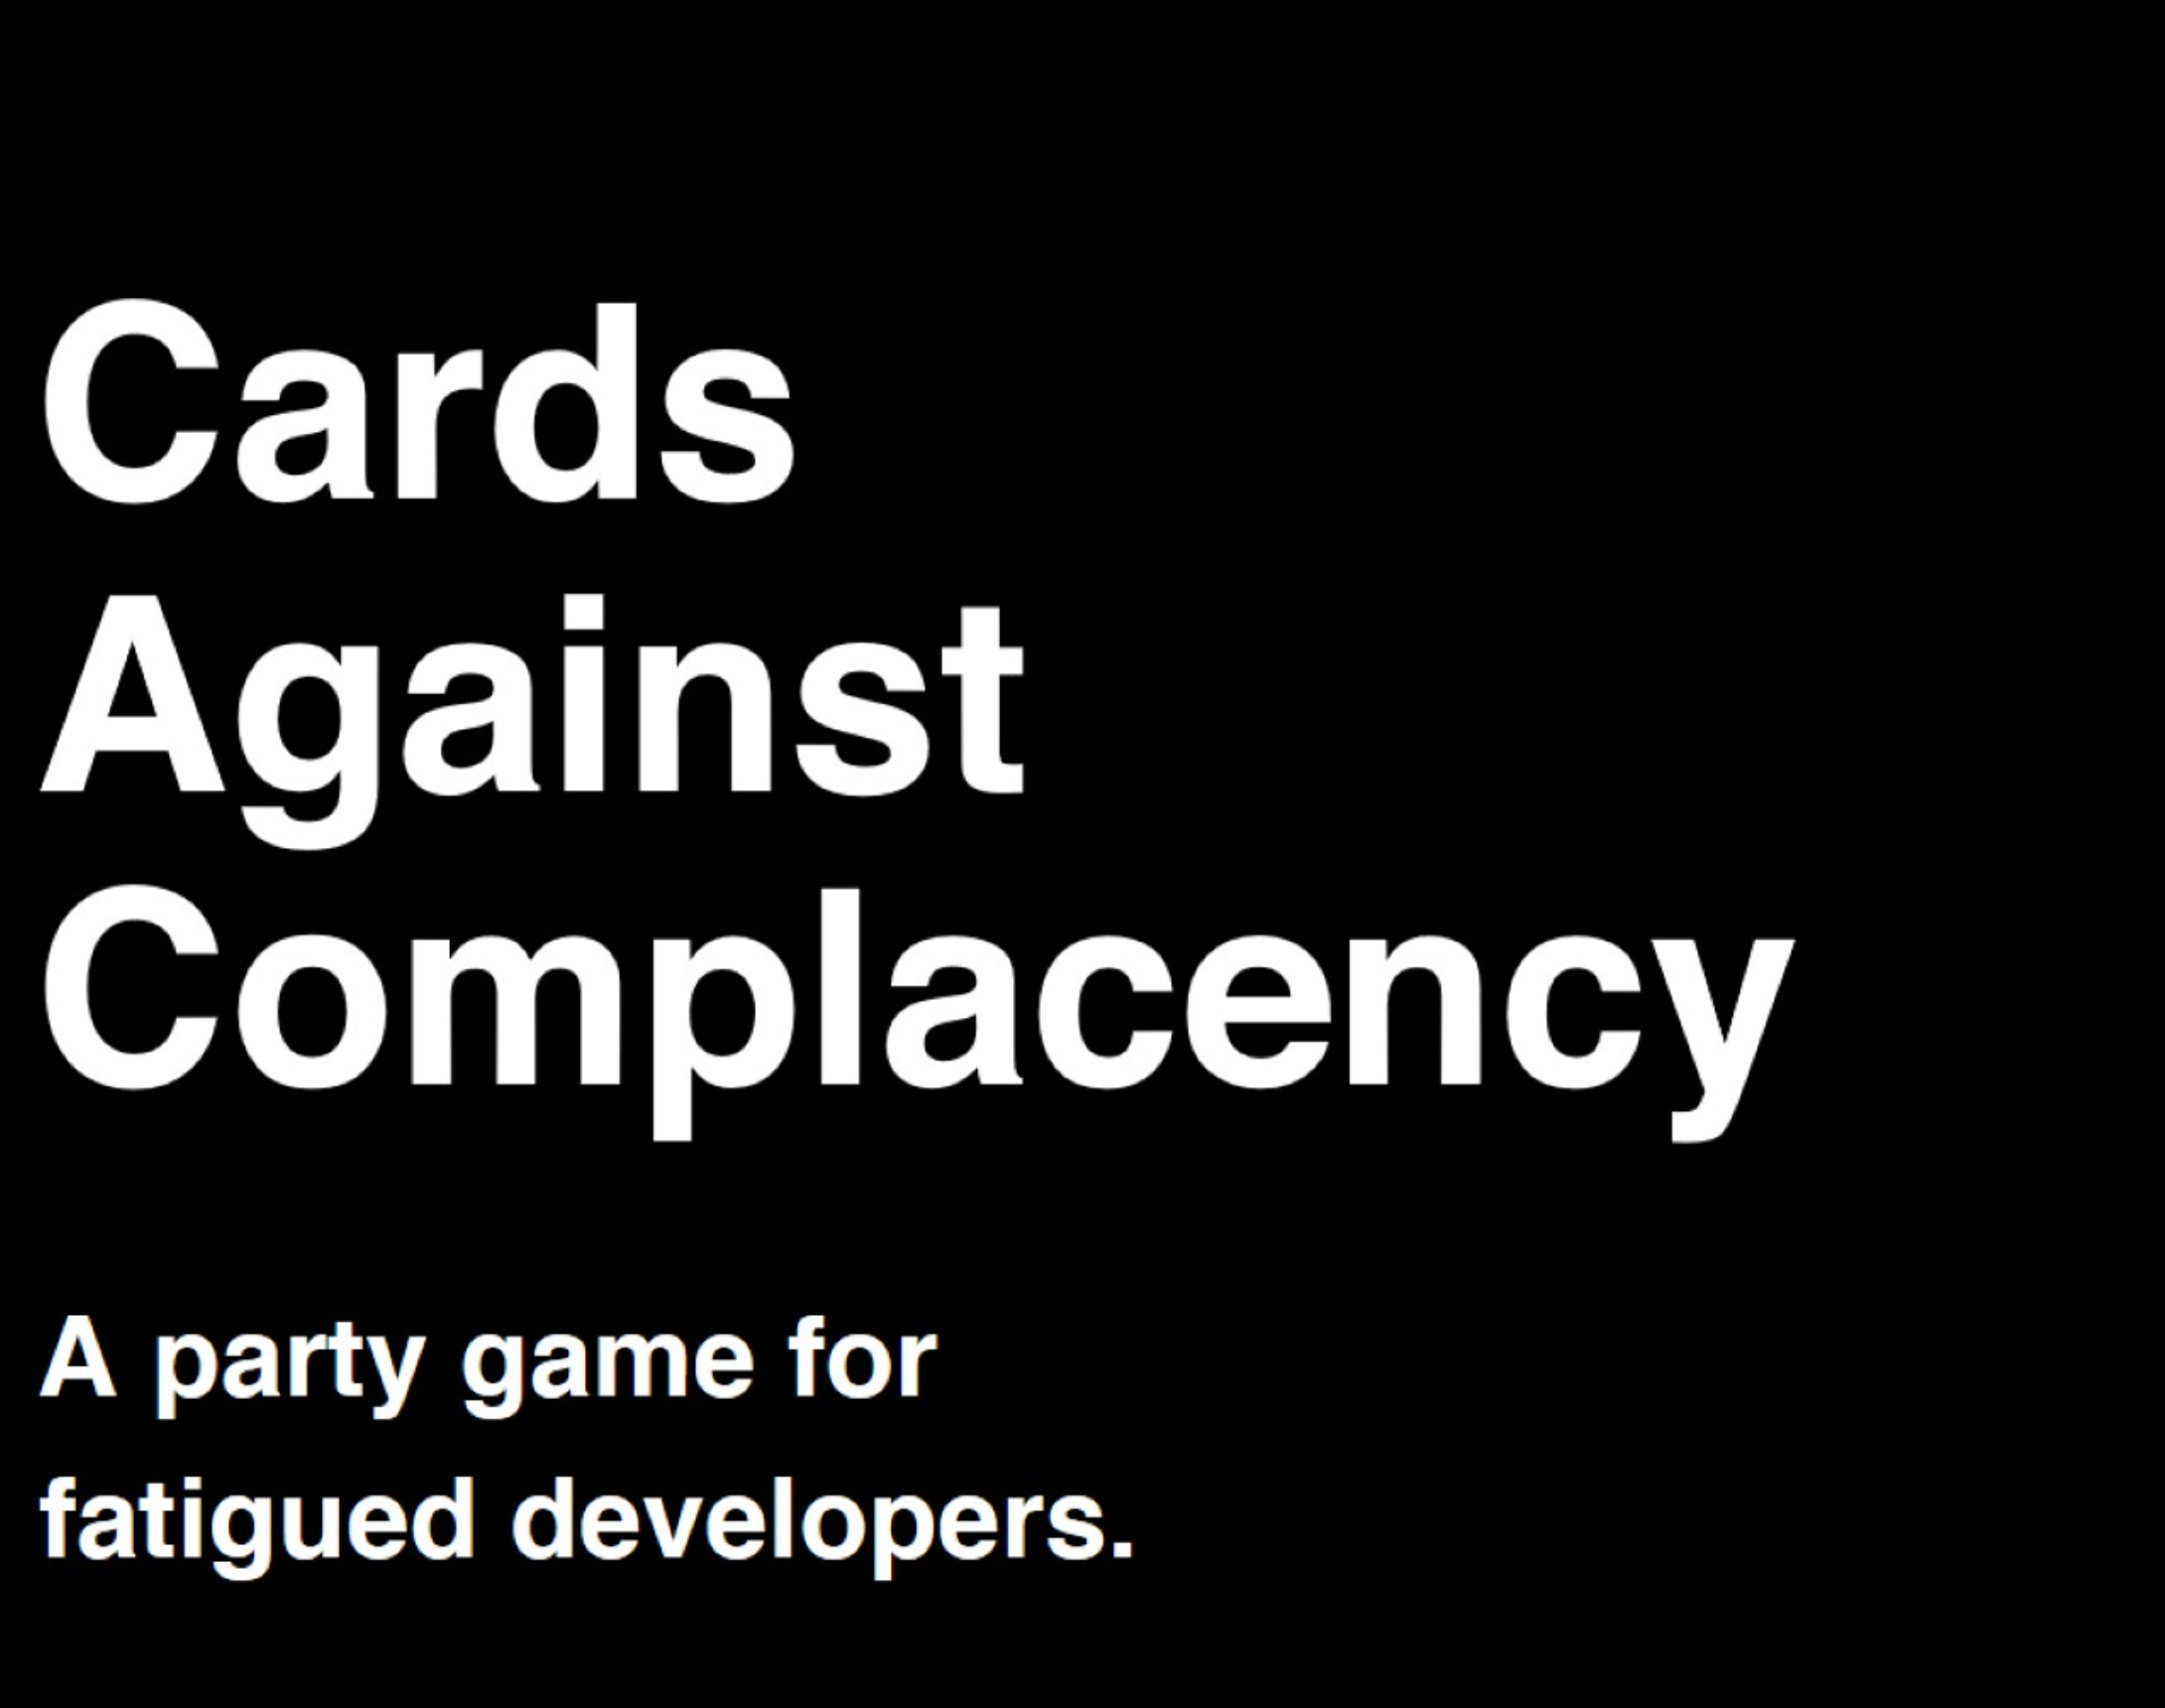 Cards Against Complacency